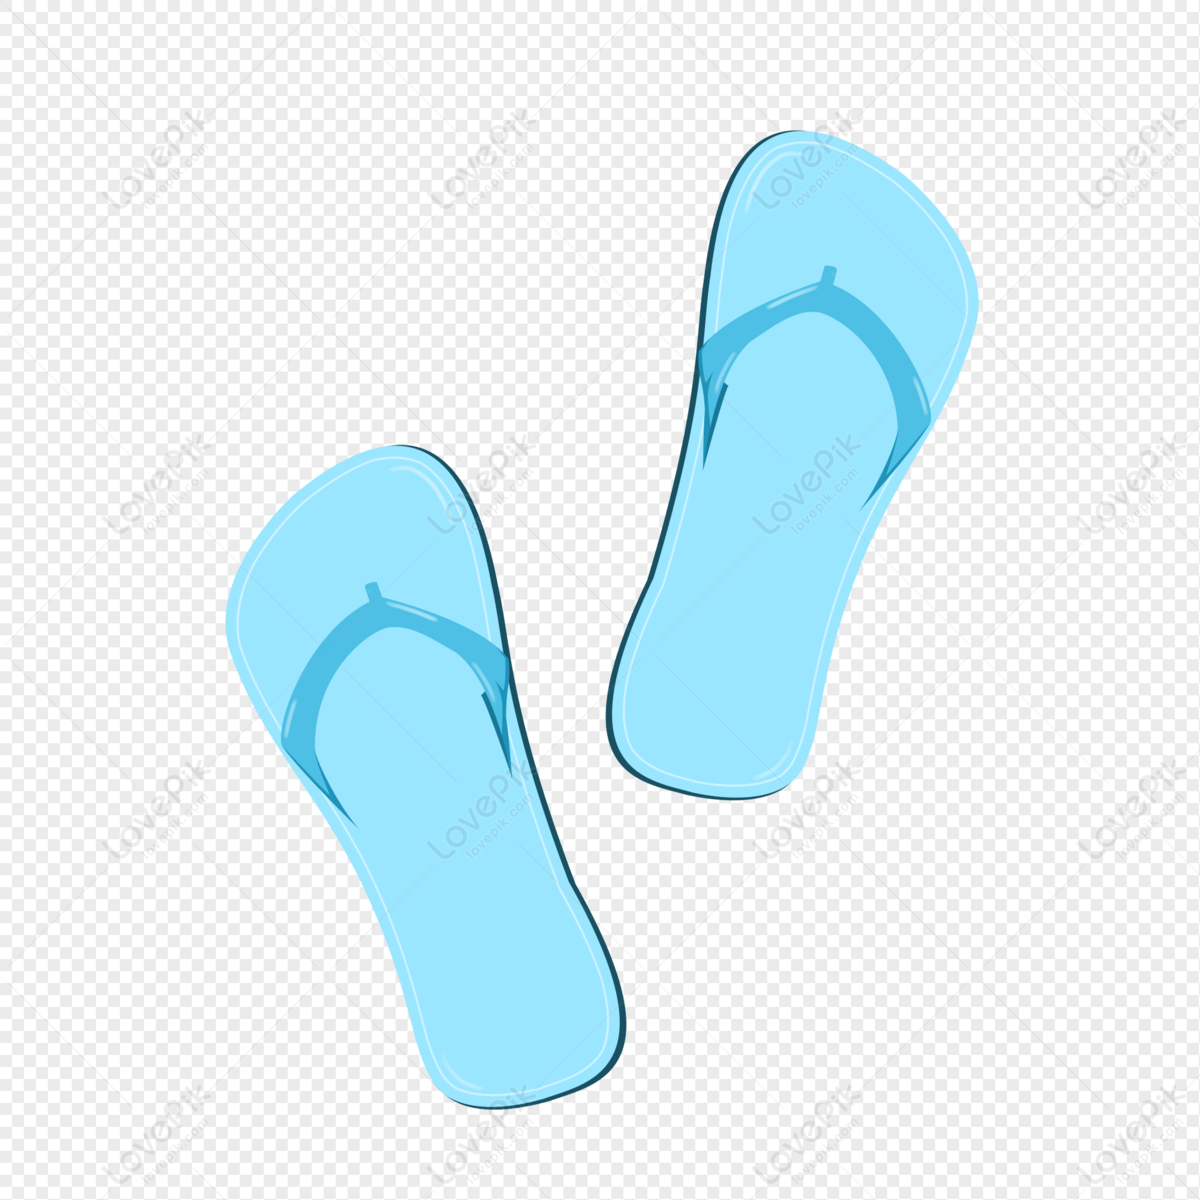 Flip Flops Free PNG And Clipart Image For Free Download - Lovepik ...